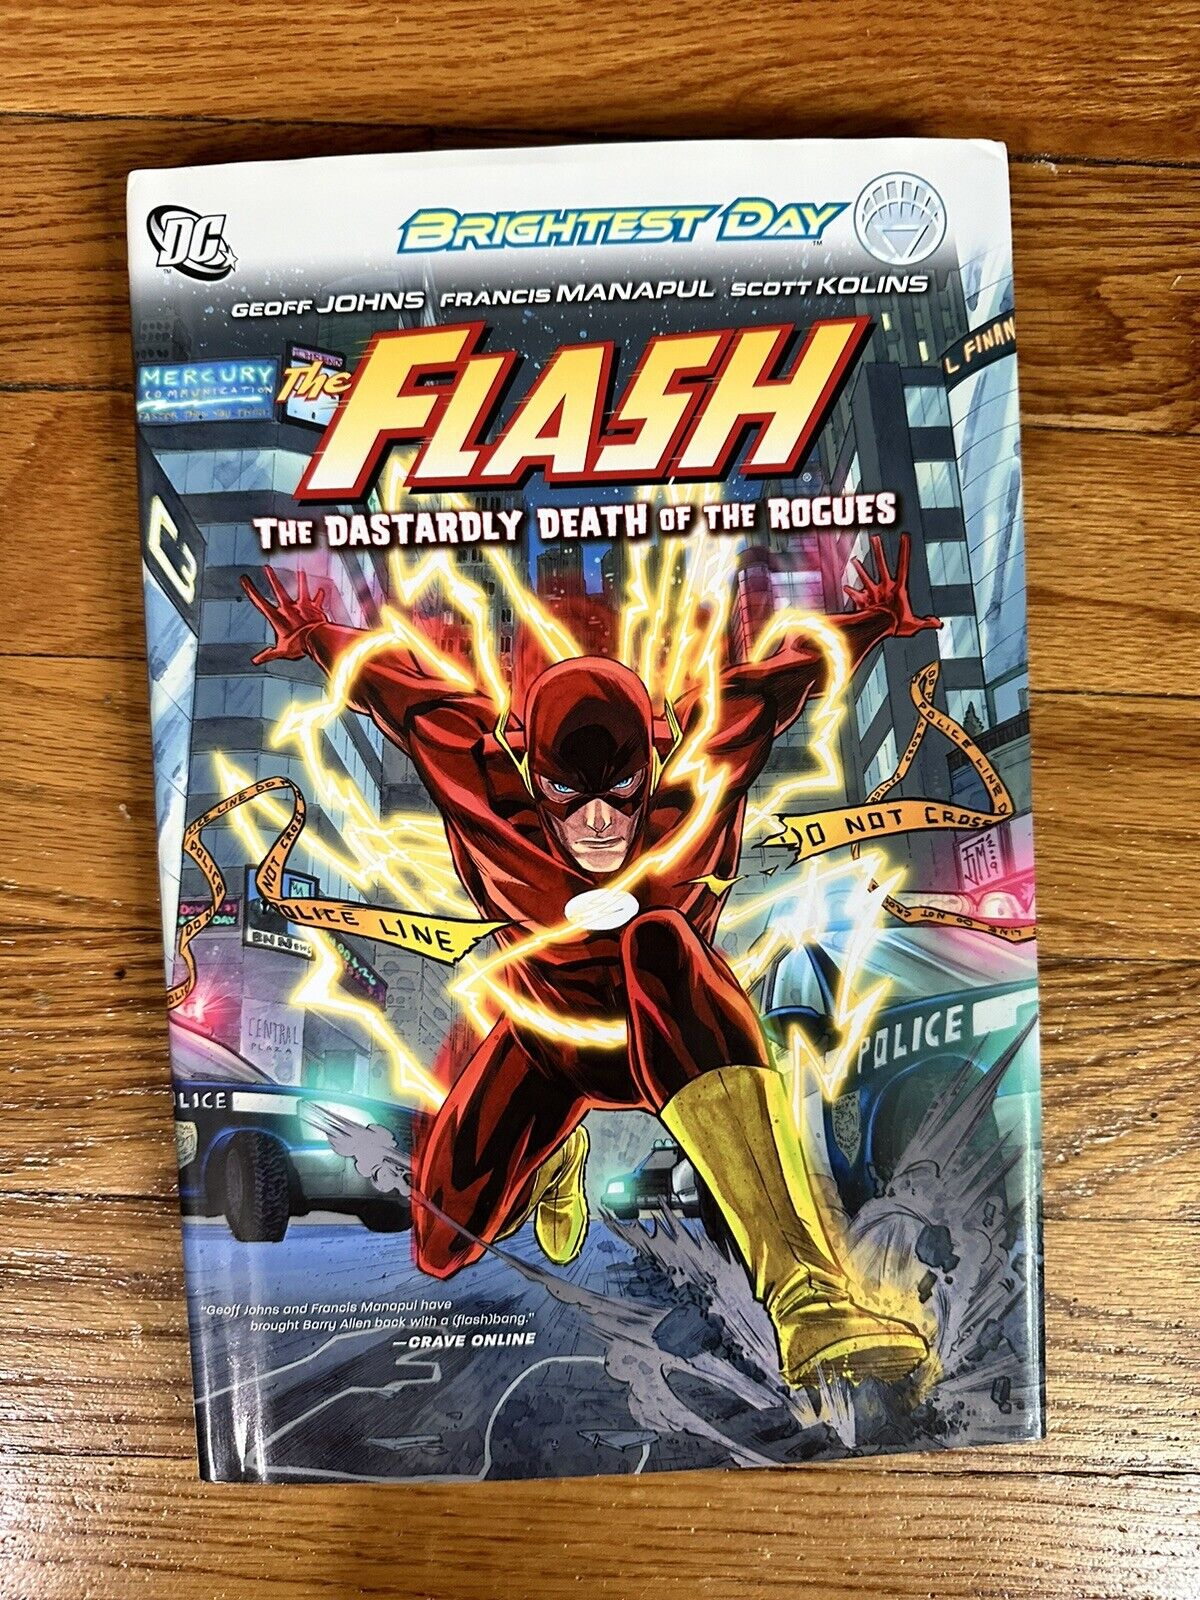 The Flash: The Dastardly Death of the Rogues DC Comics Hardcover Geoff Johns HC